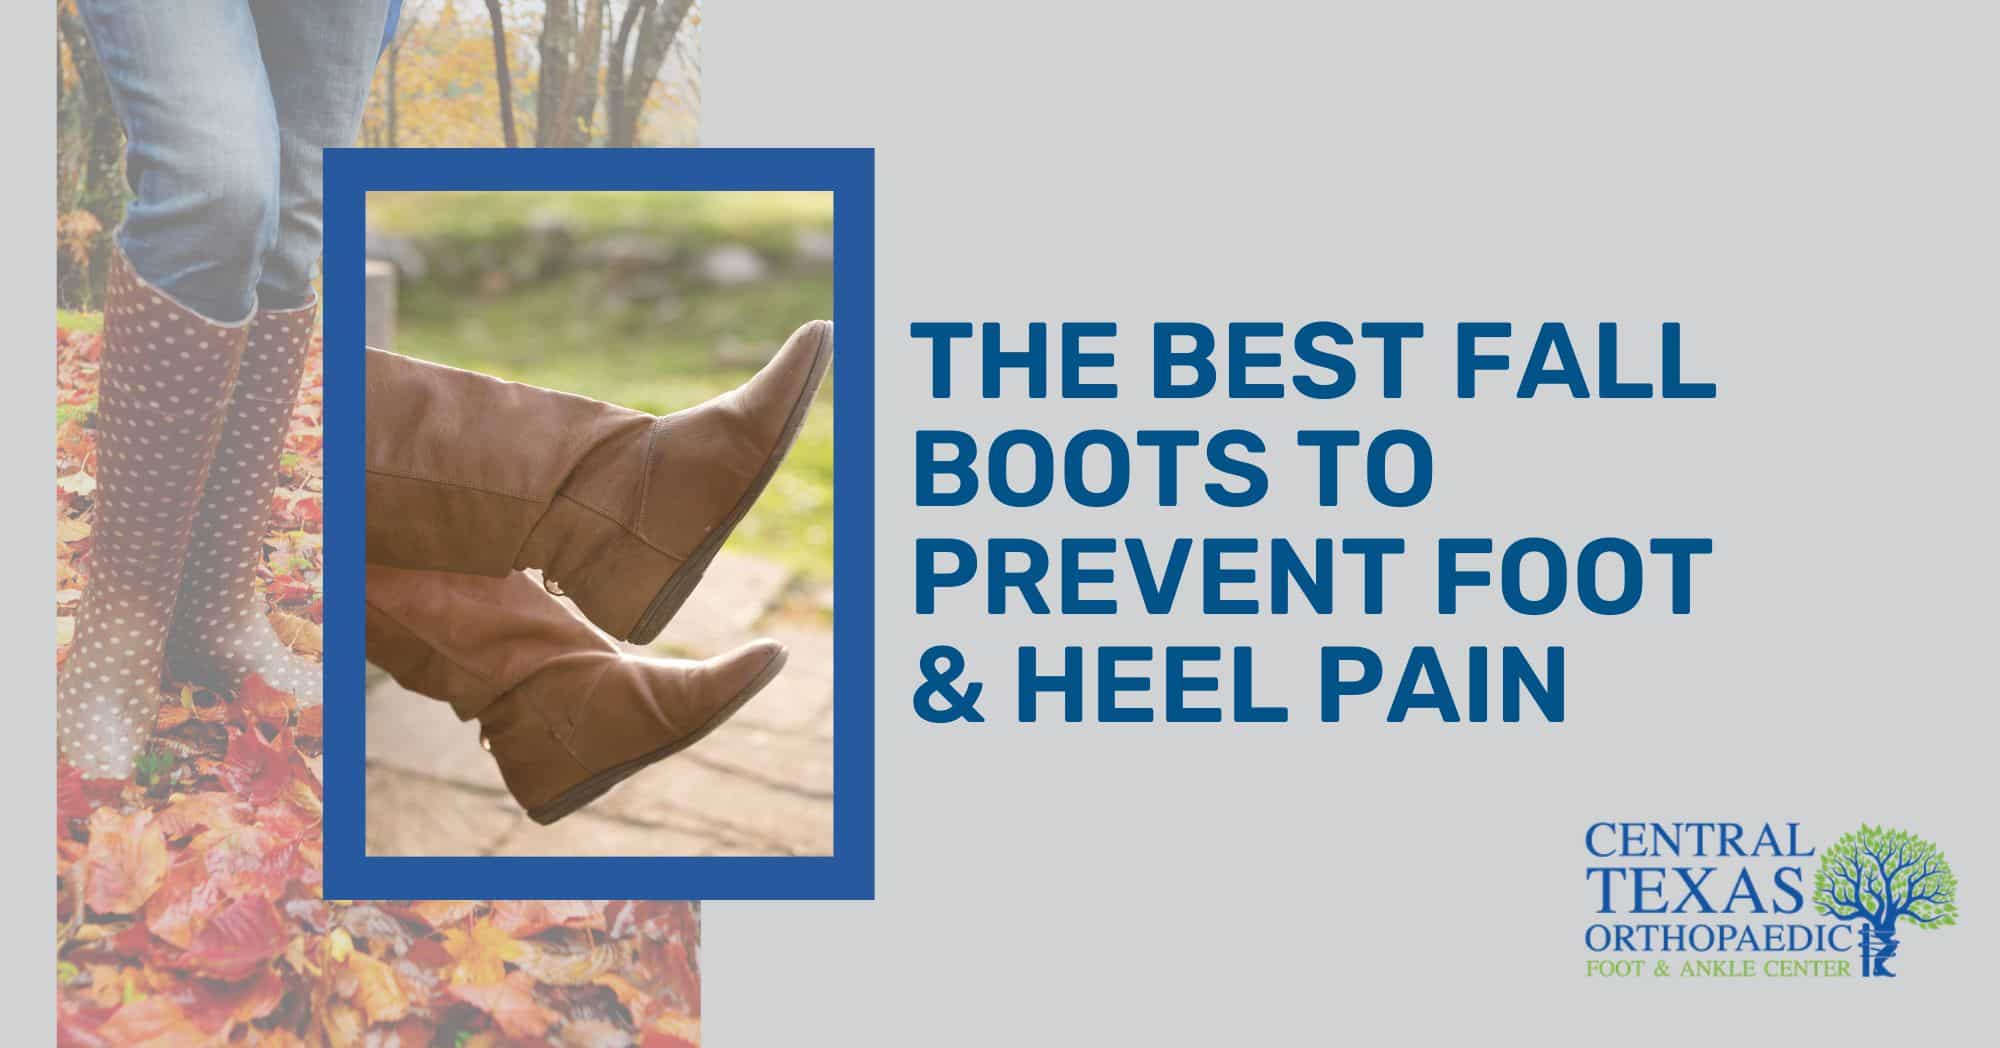 CTX The Best Fall Boots to Prevent Foot & Heel Pain